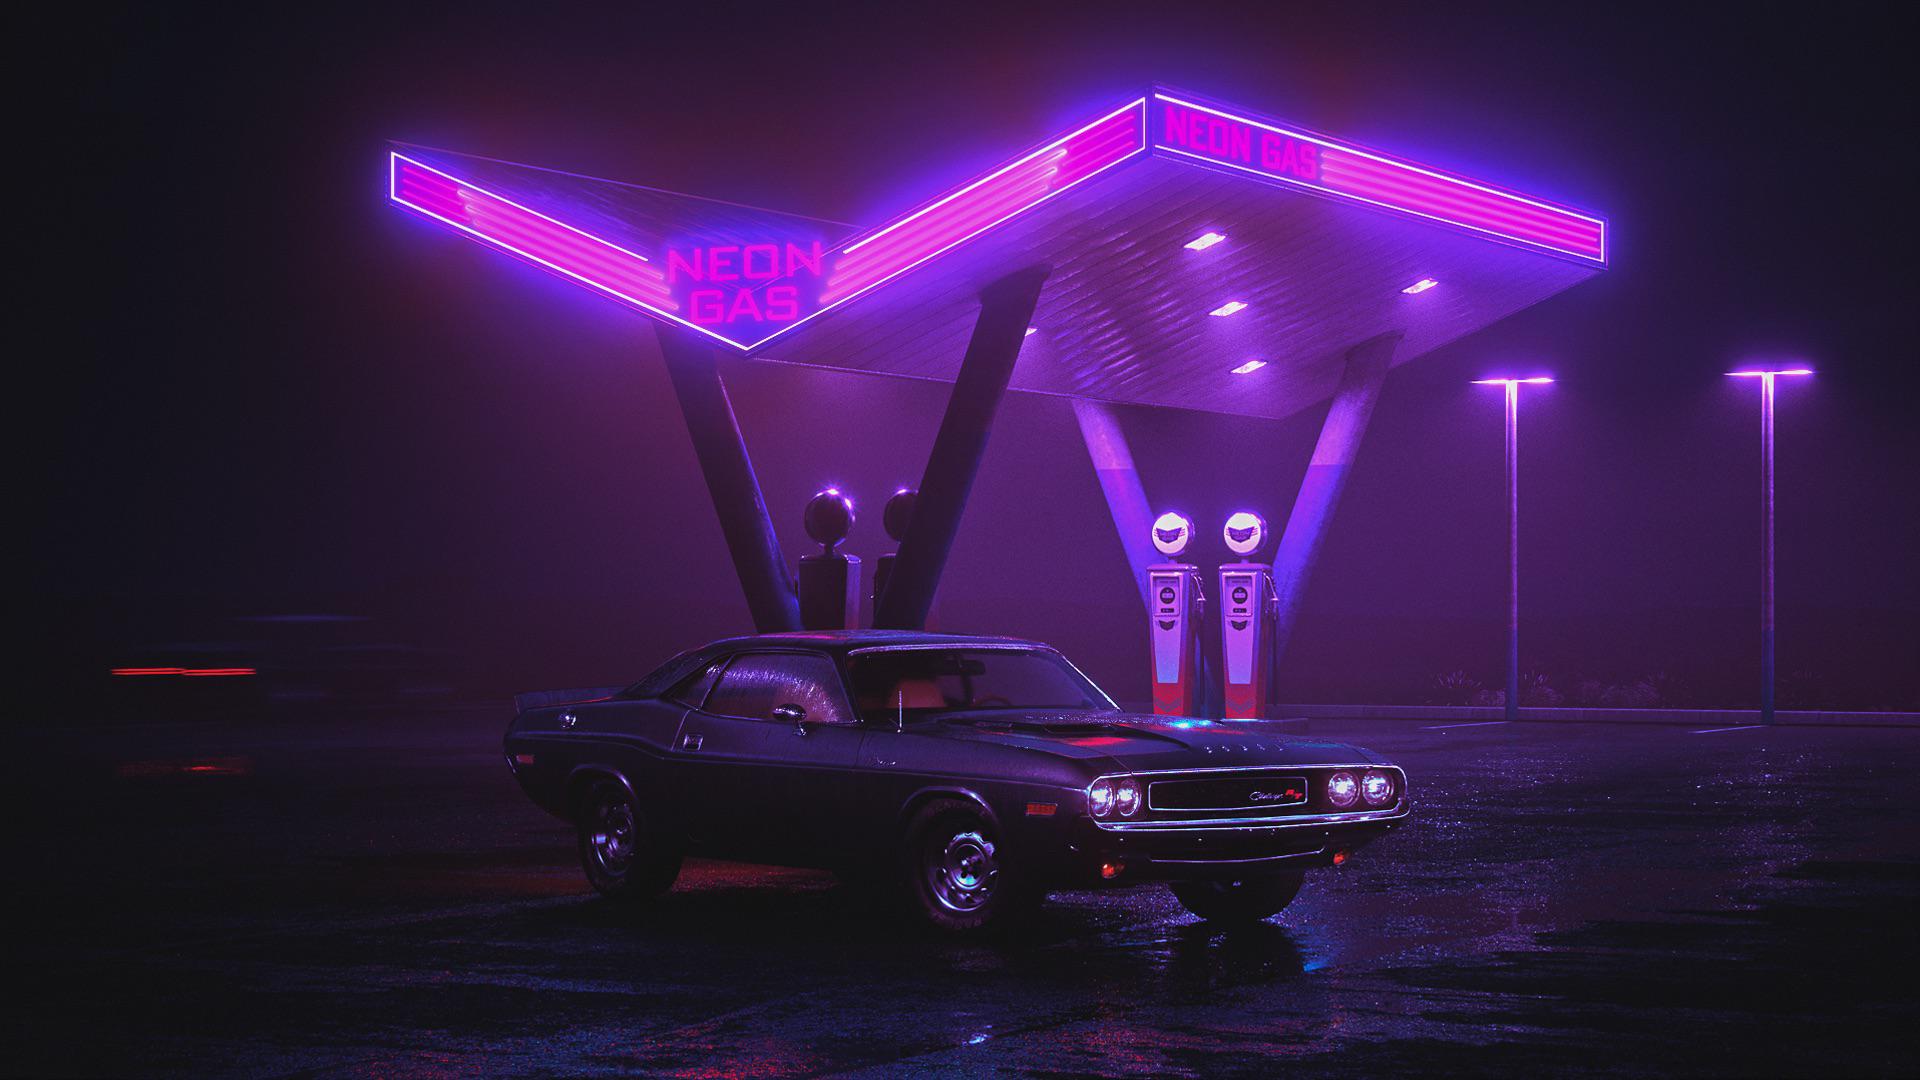 Neon Gas Station [1920x1080]